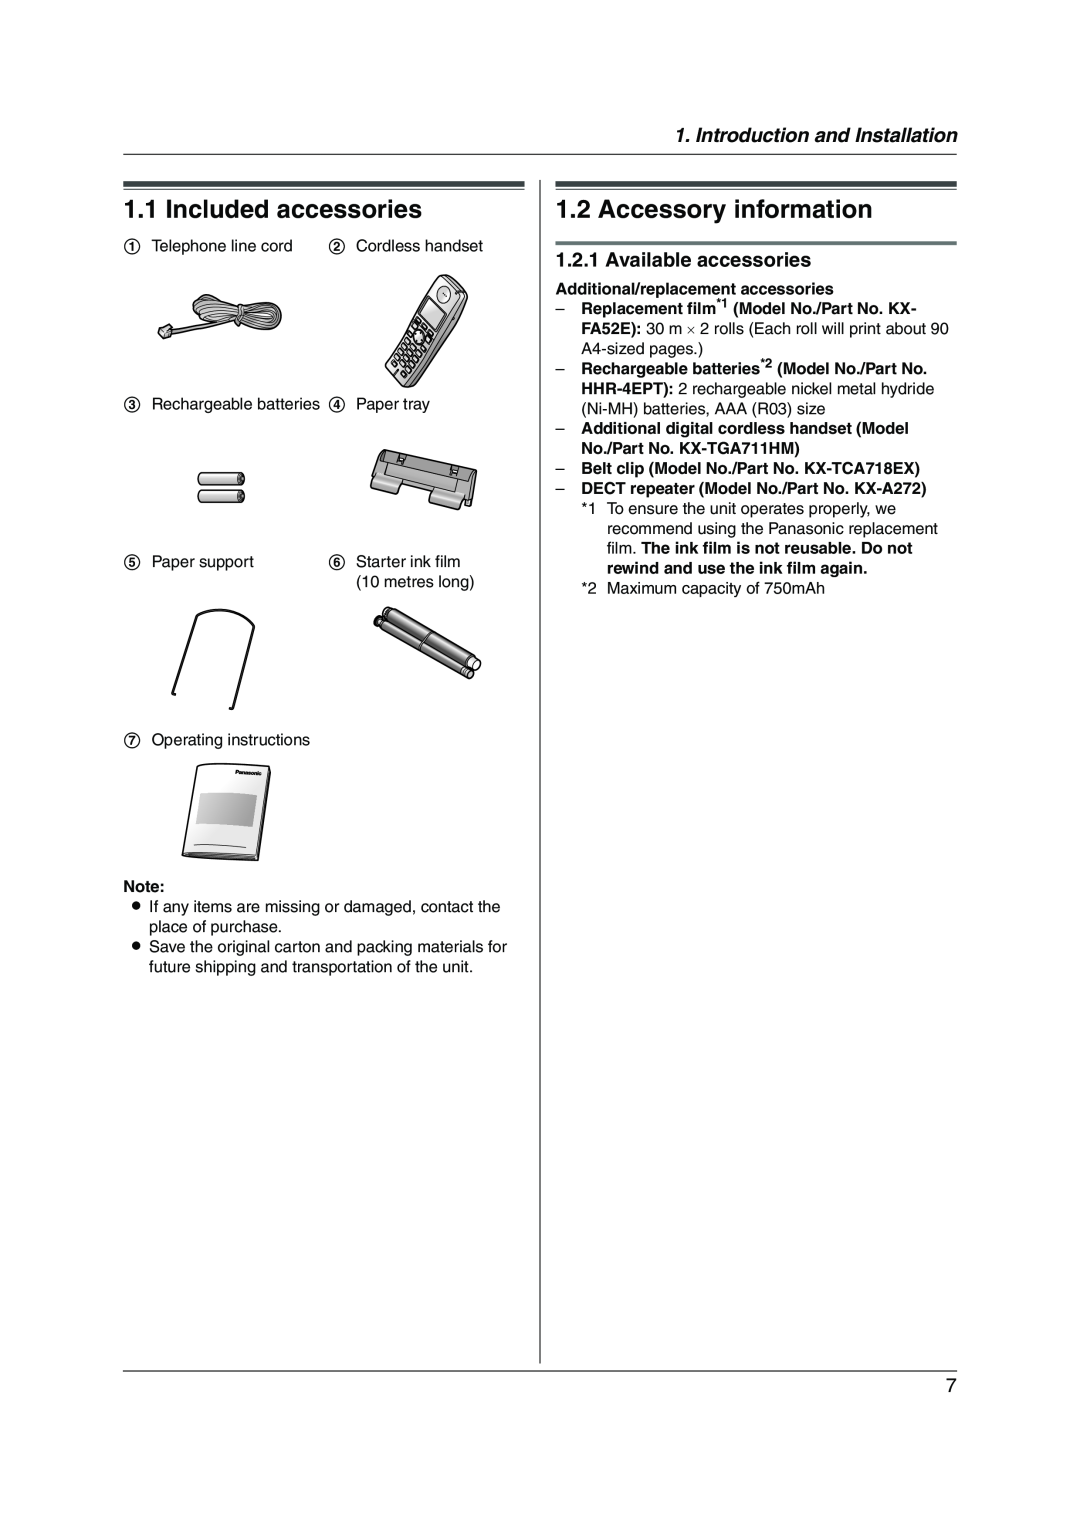 Panasonic KX-FC228HK Included accessories, Accessory information, Introduction and Installation, Available accessories 